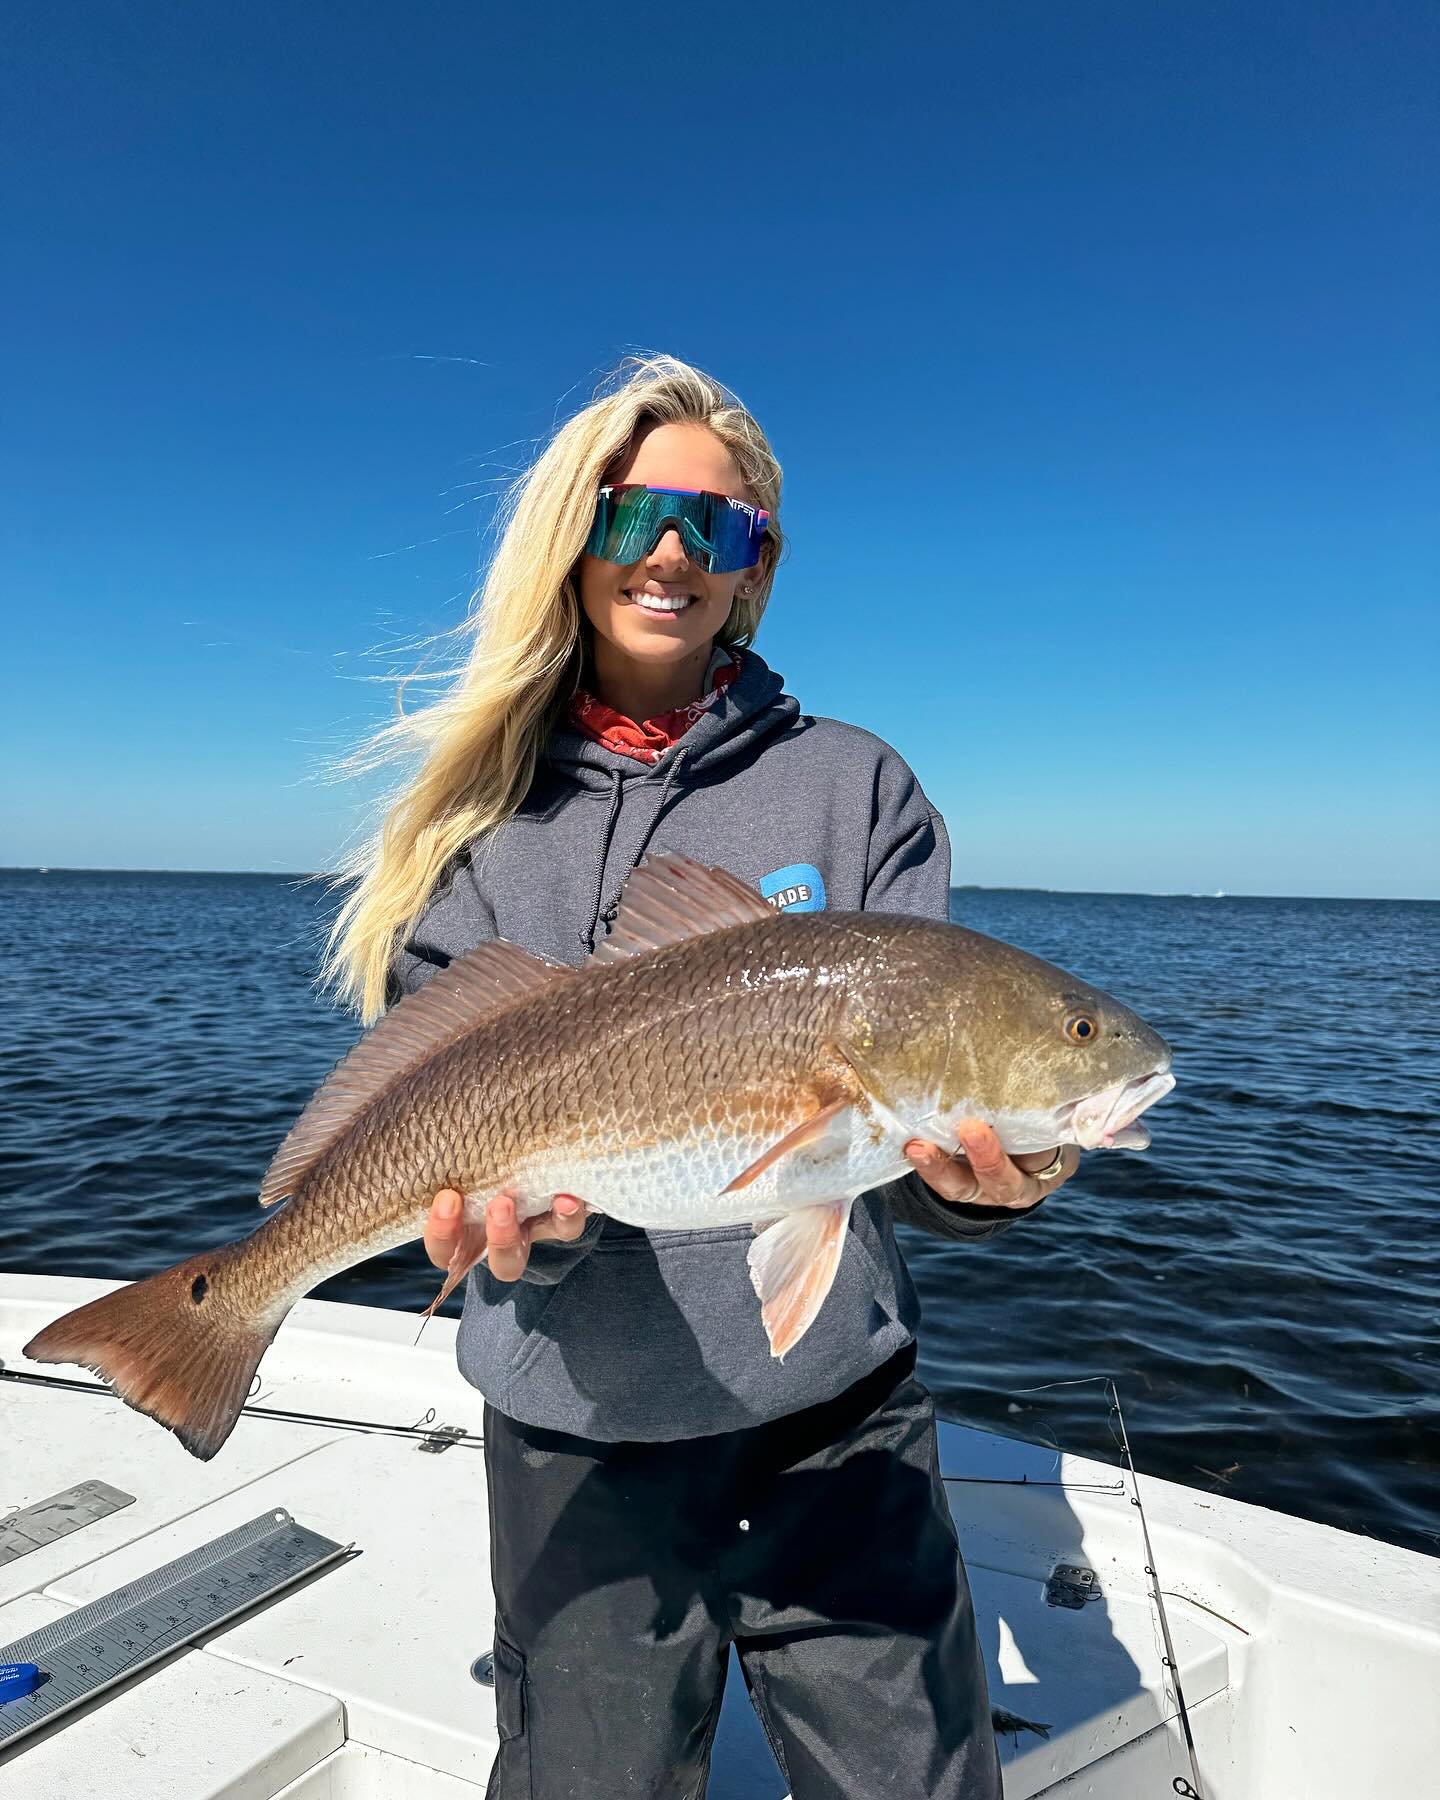 Got on the leaderboard for the @johnsoninvitational with a full slam of 70 inches (total length of a snook, red & trout). Too bad it wasn’t by weight though, this redfish was fat 😂 90 inches won the tournament but still a great time. Even won this Yeti cooler 🍻 #livebait #tournament #newportrichey #hooters